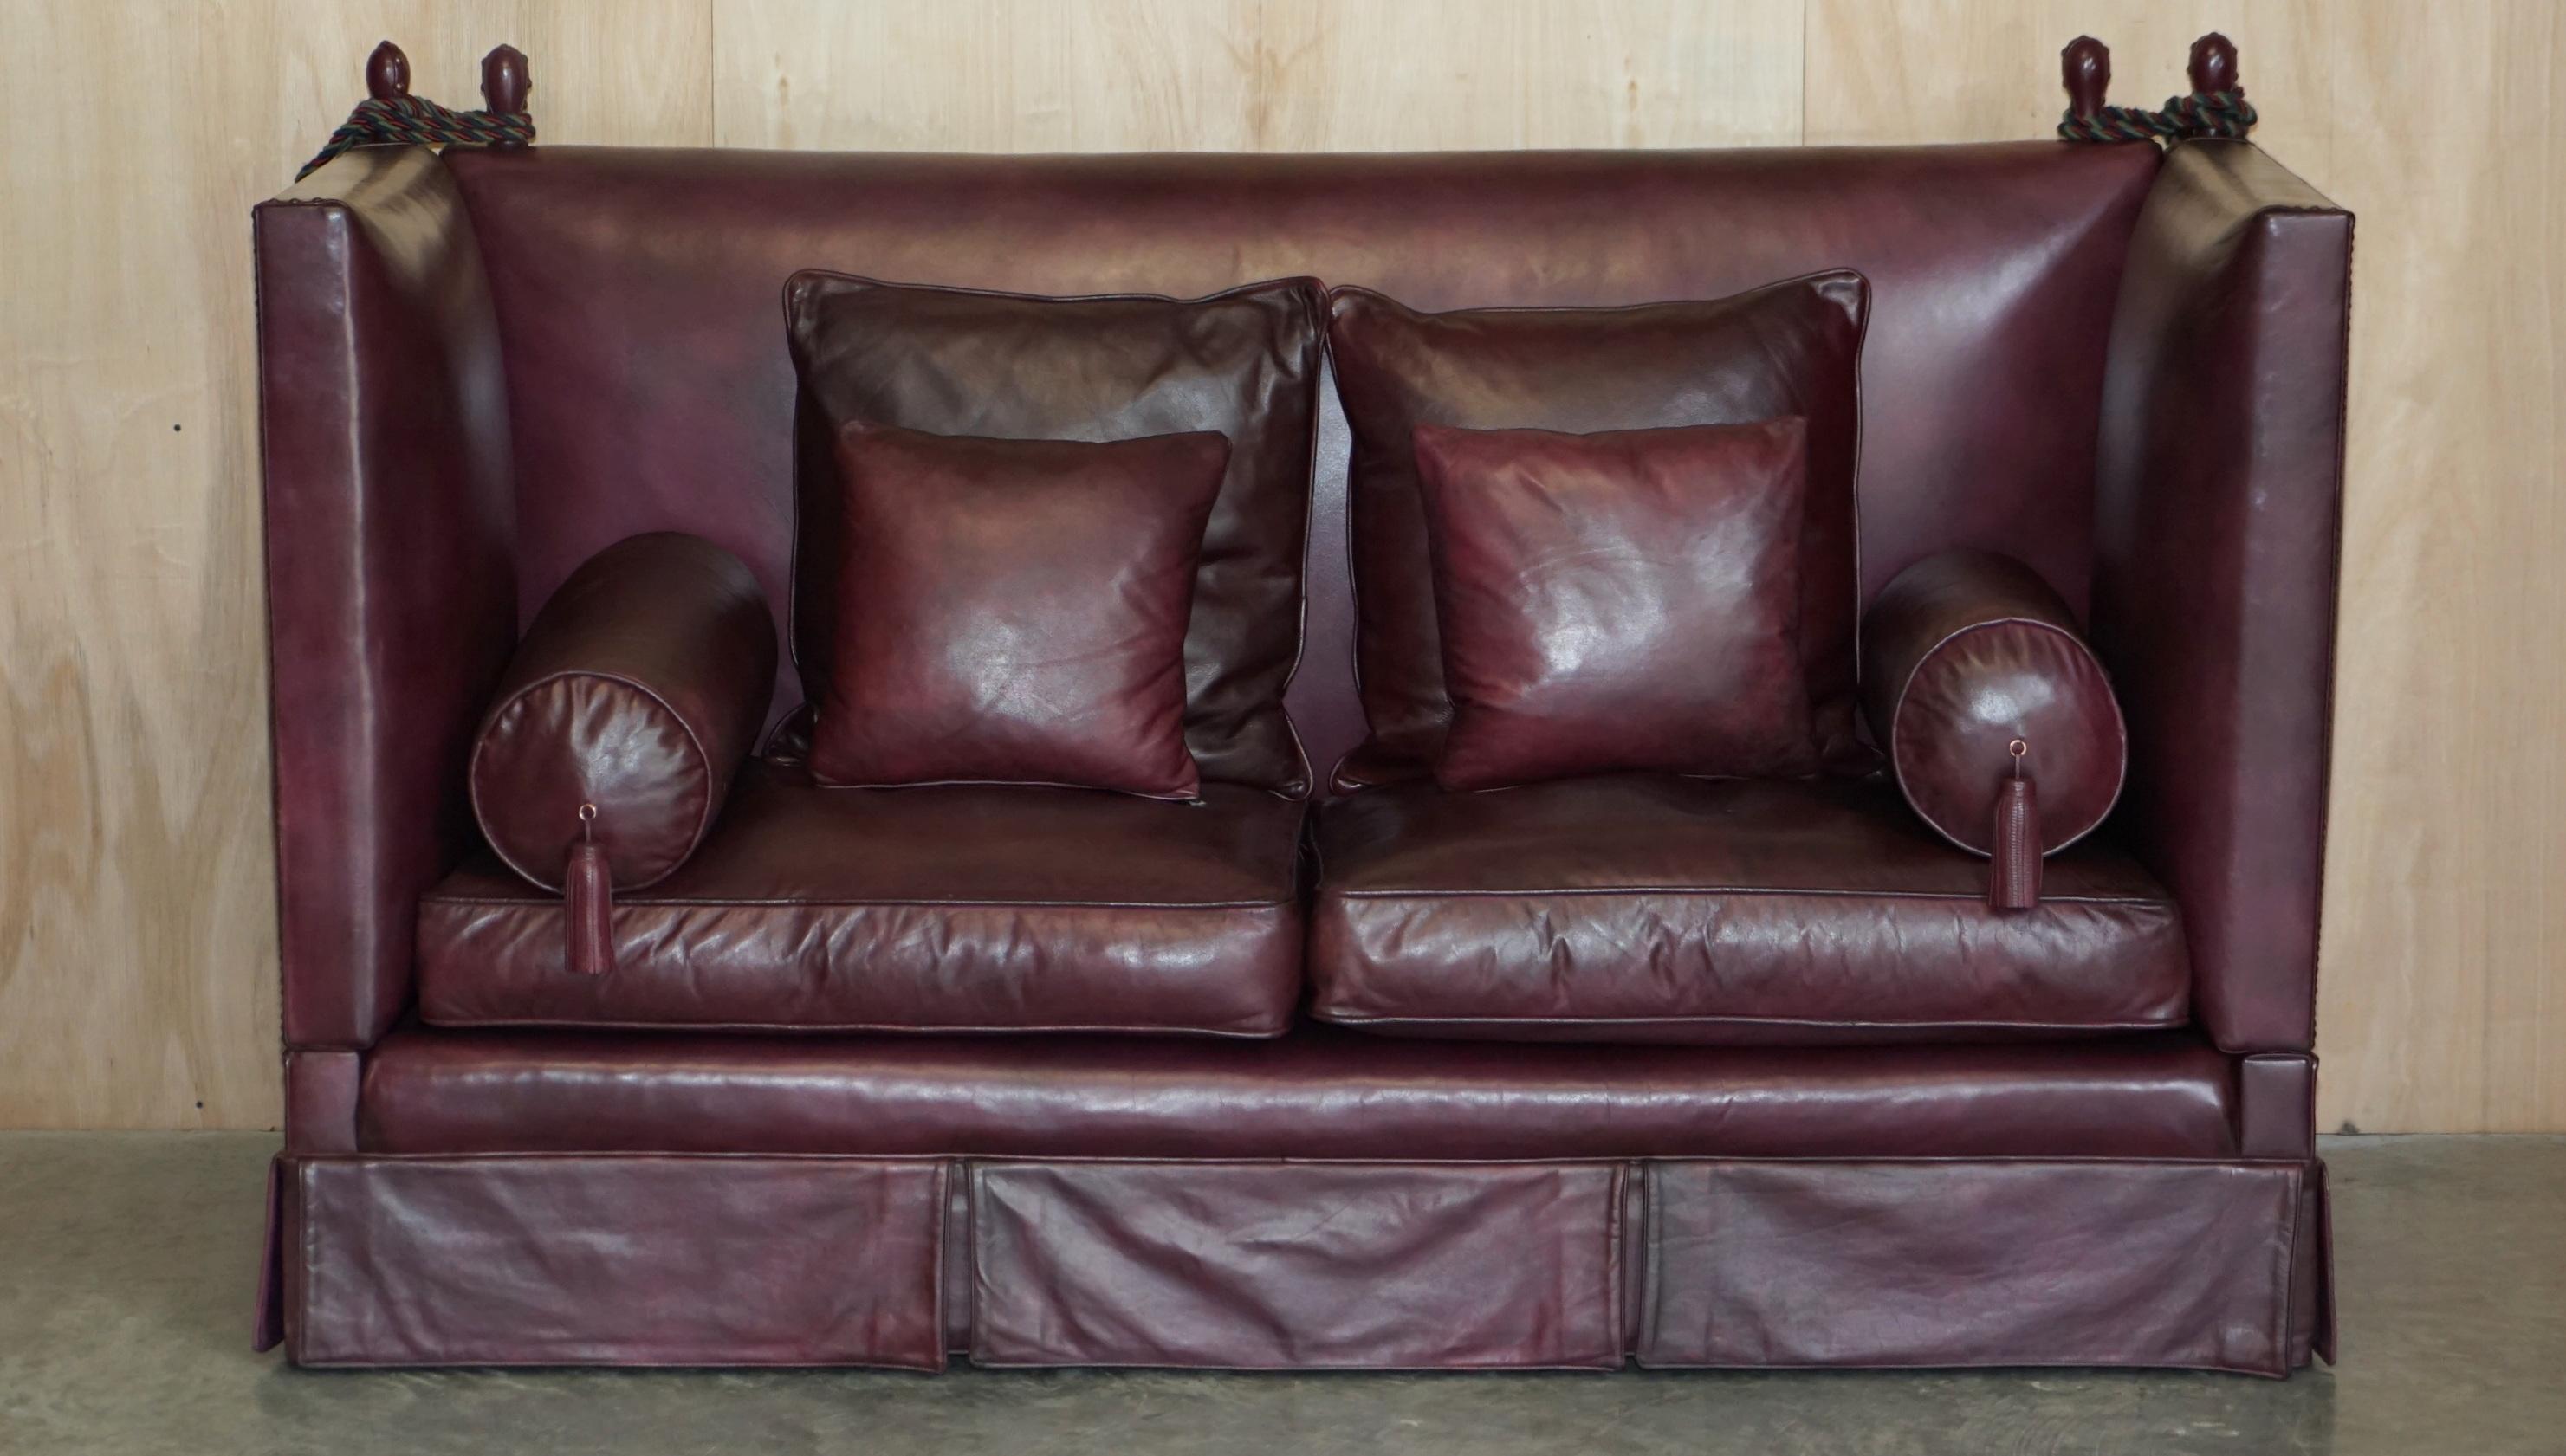 We are delighted to offer for sale this original Victorian circa 1860-1880 fully restored oxblood leather Knoll sofa with overstuff feather filled cushions.

This sofa was fully restored around 2-3 years ago from top to bottom including the